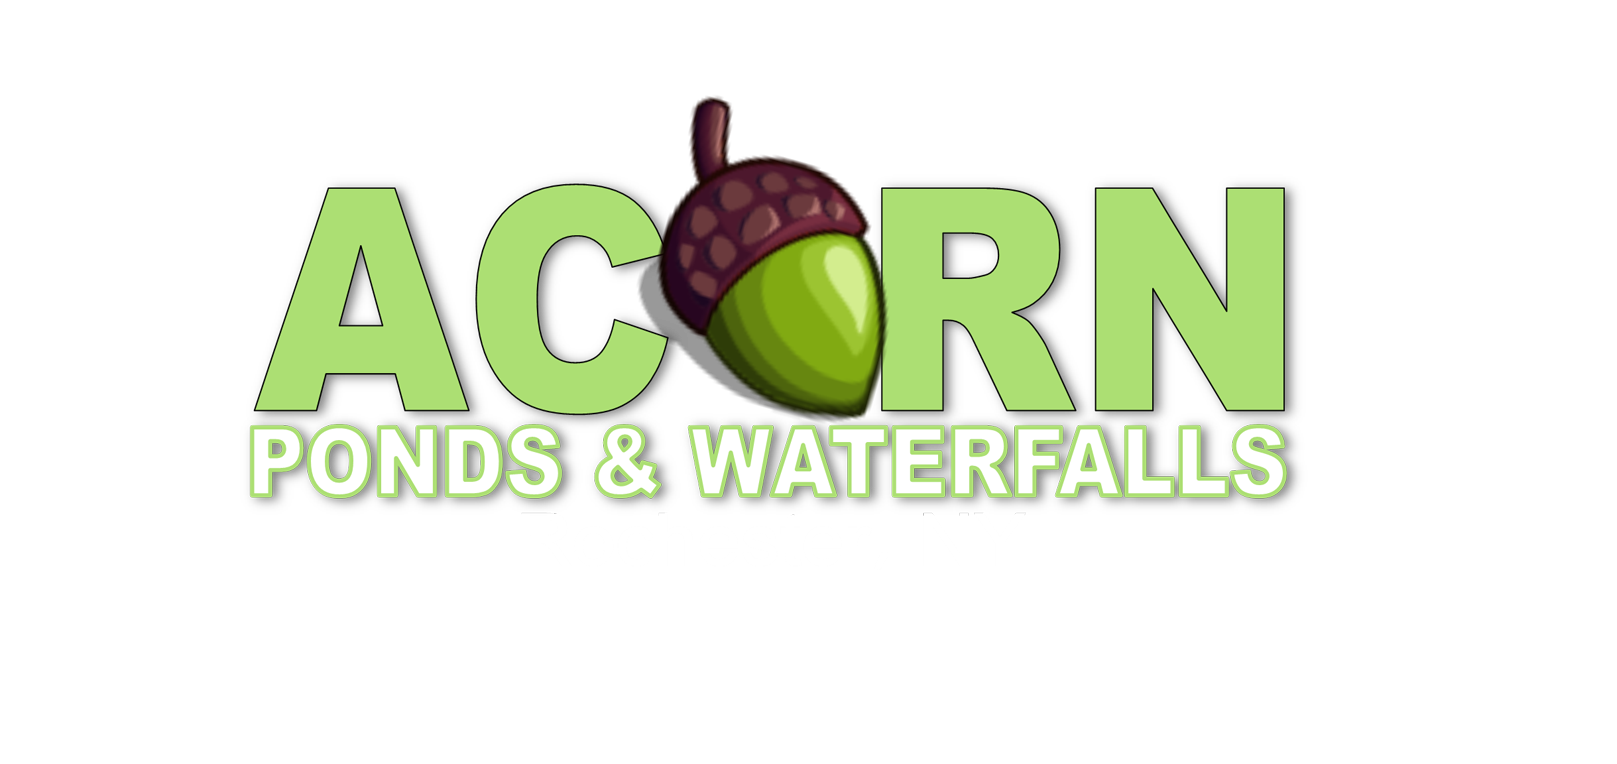 LED Landscape Lighting Service In Rochester Monroe County New York (NY) By Acorn Ponds & Waterfalls